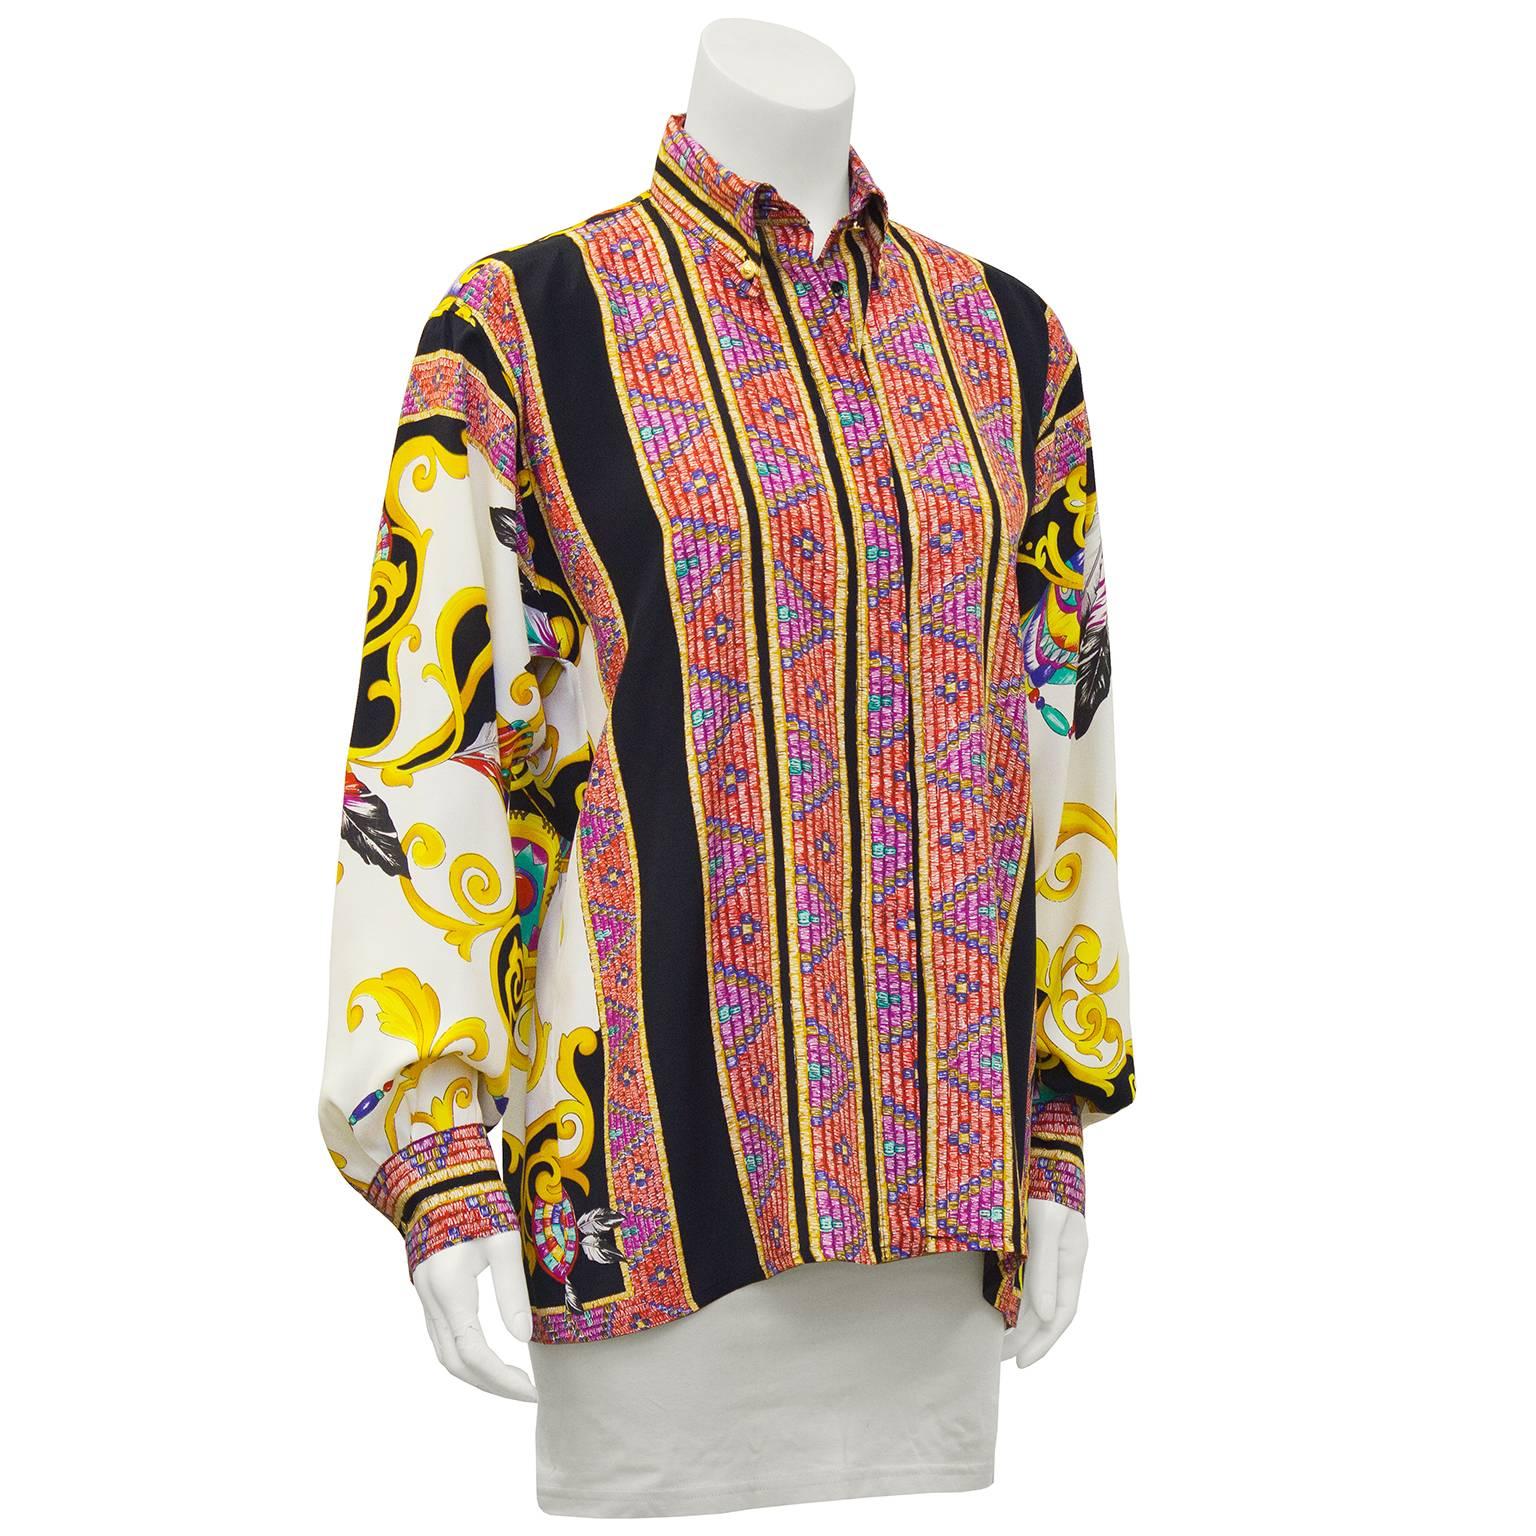 Eye dazzling circa 2000 Versace silk button front shirt. Gold Versace button details on collar points and cuffs. Placket covered buttons, square cut fit. Bold jewel tone vertical stripe patttern combined with swirly graphic design on the back and